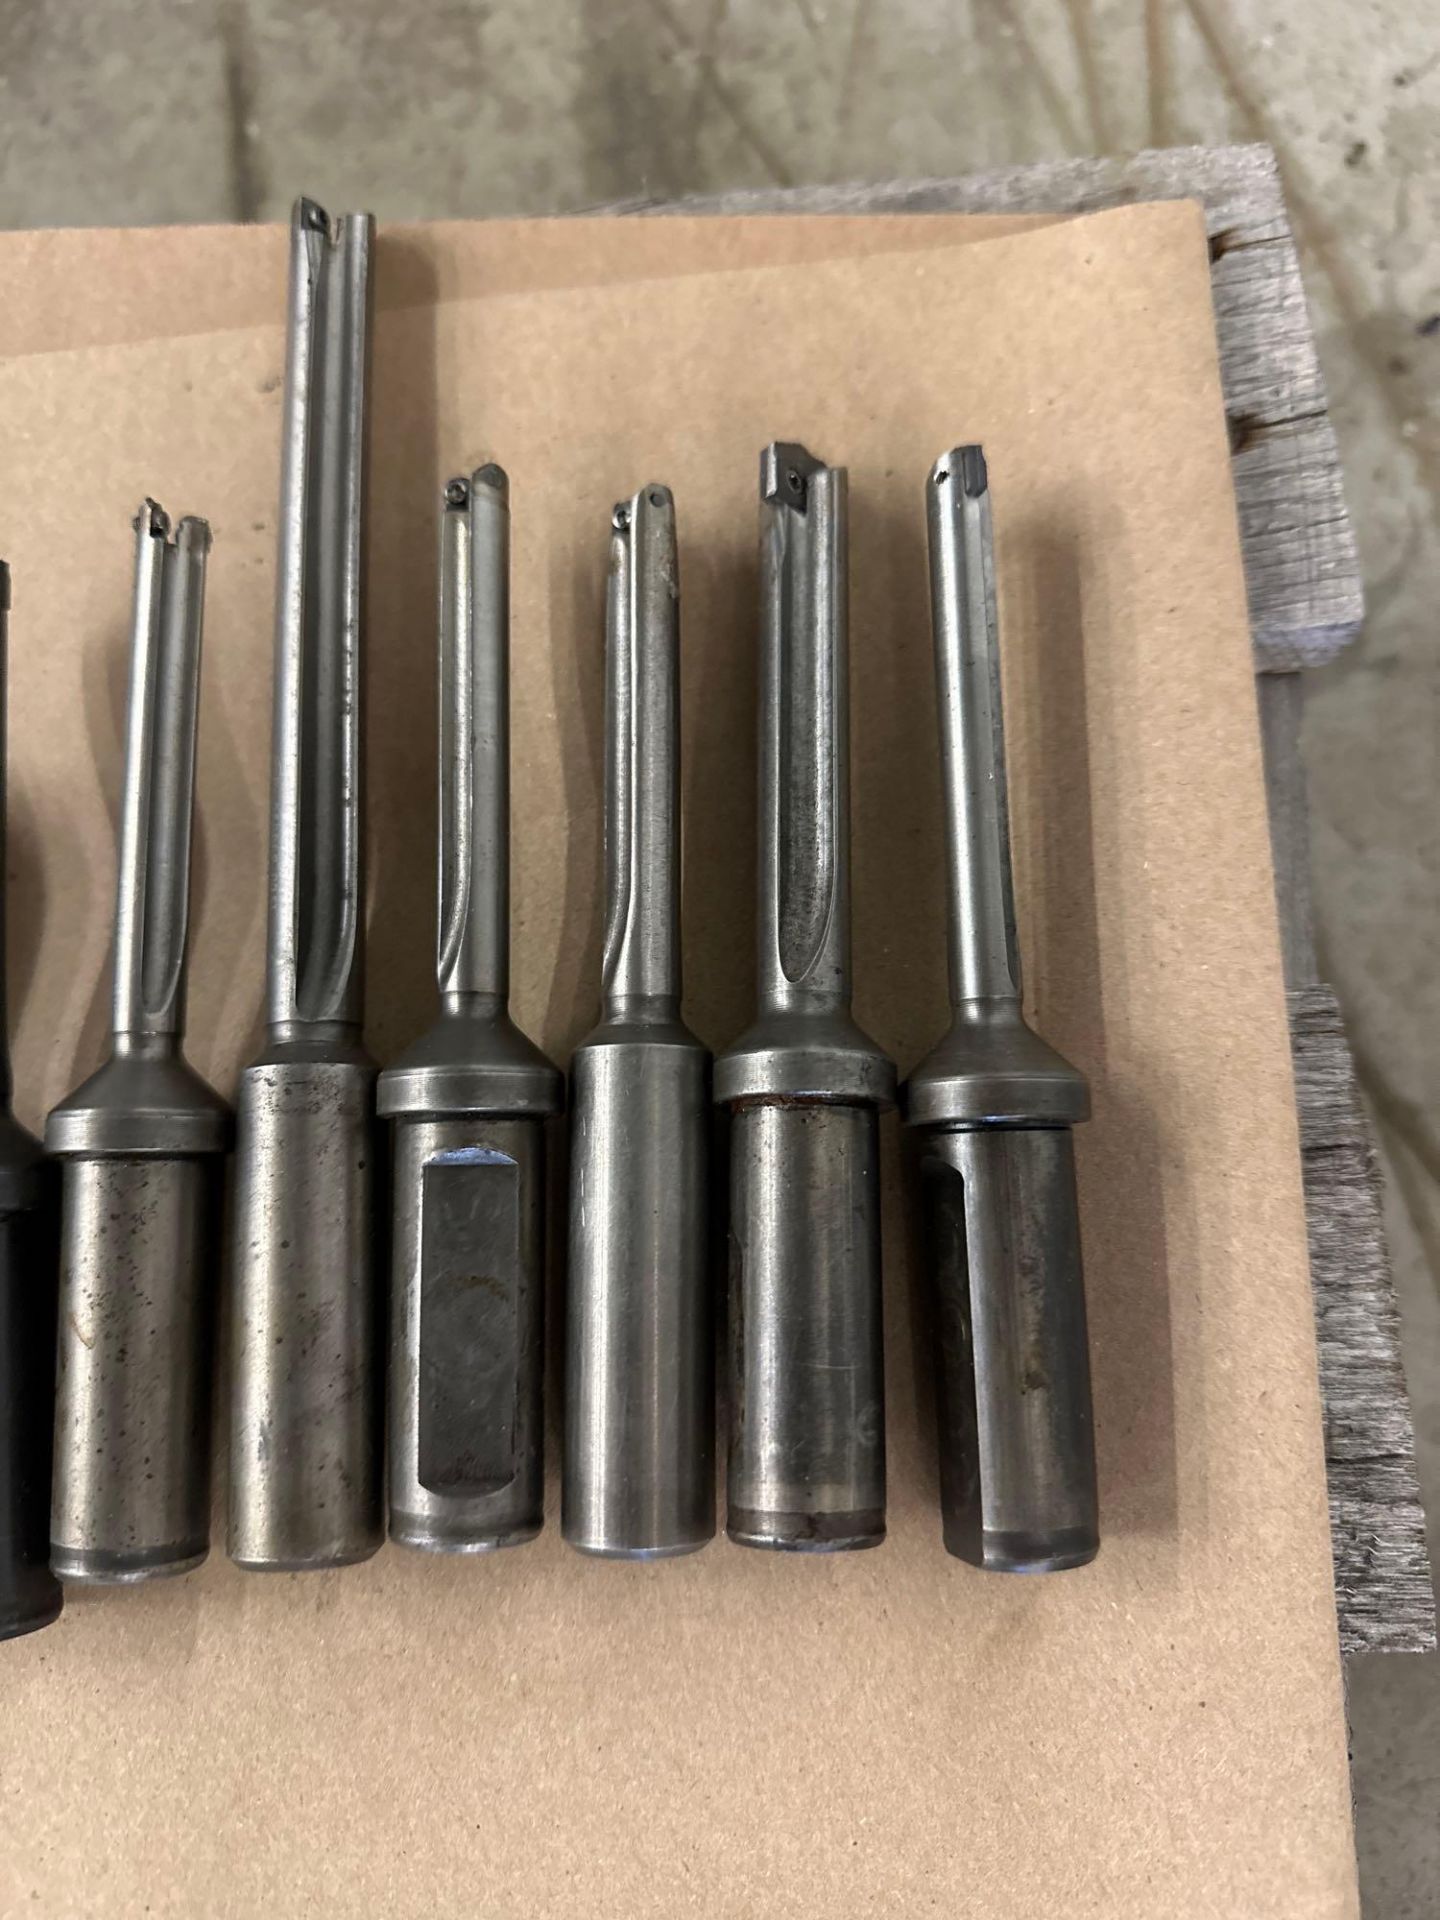 Lot of 9 Assorted Spade Insert Boring Bars Size Ranging From: 3/4” X 4 5/8” to 3/4” X 7 3/4” - Image 5 of 6